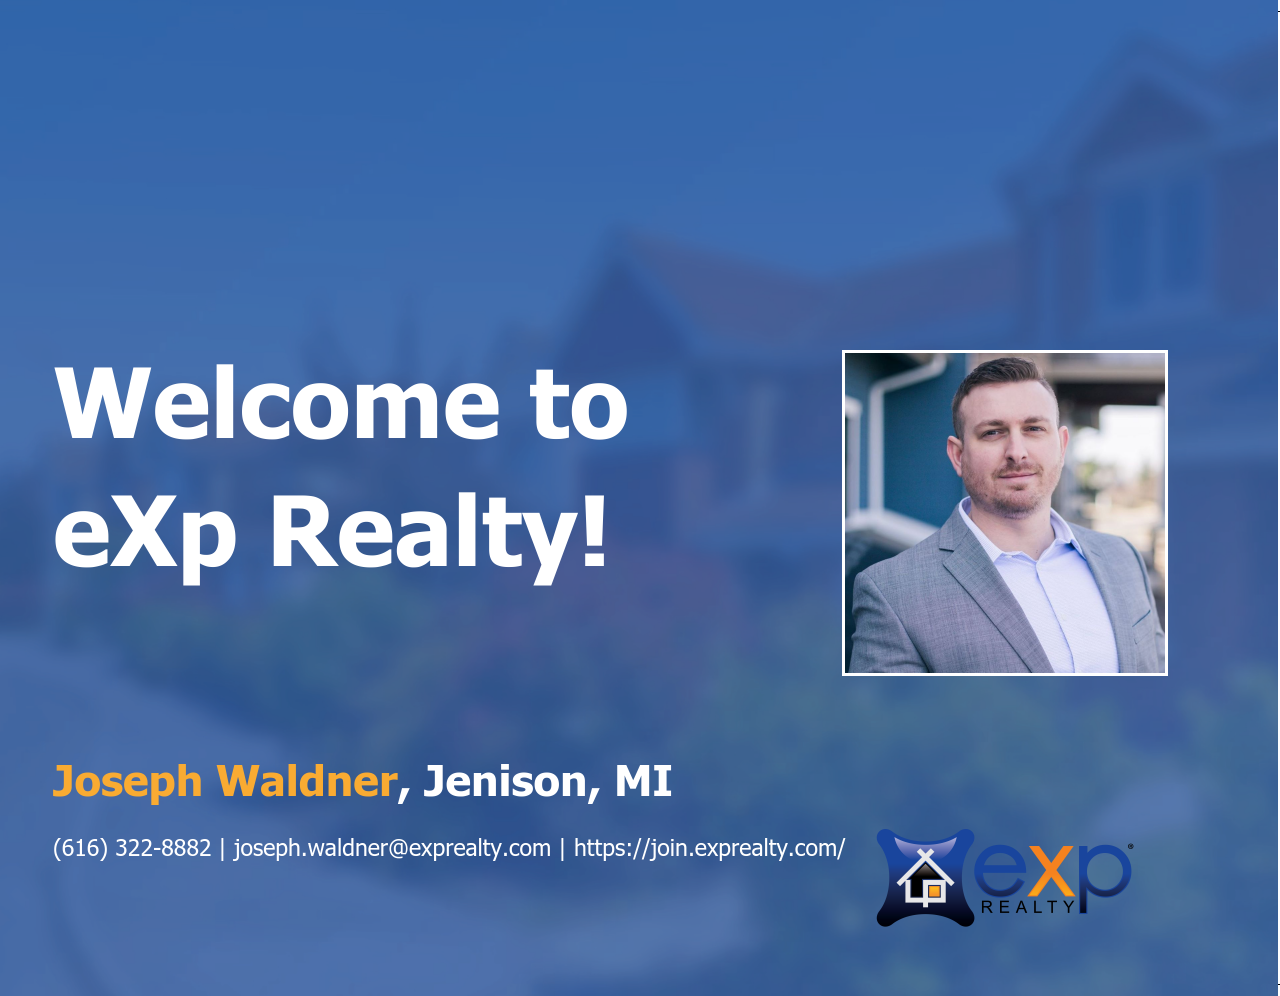 Welcome to eXp Realty Joseph Waldner!